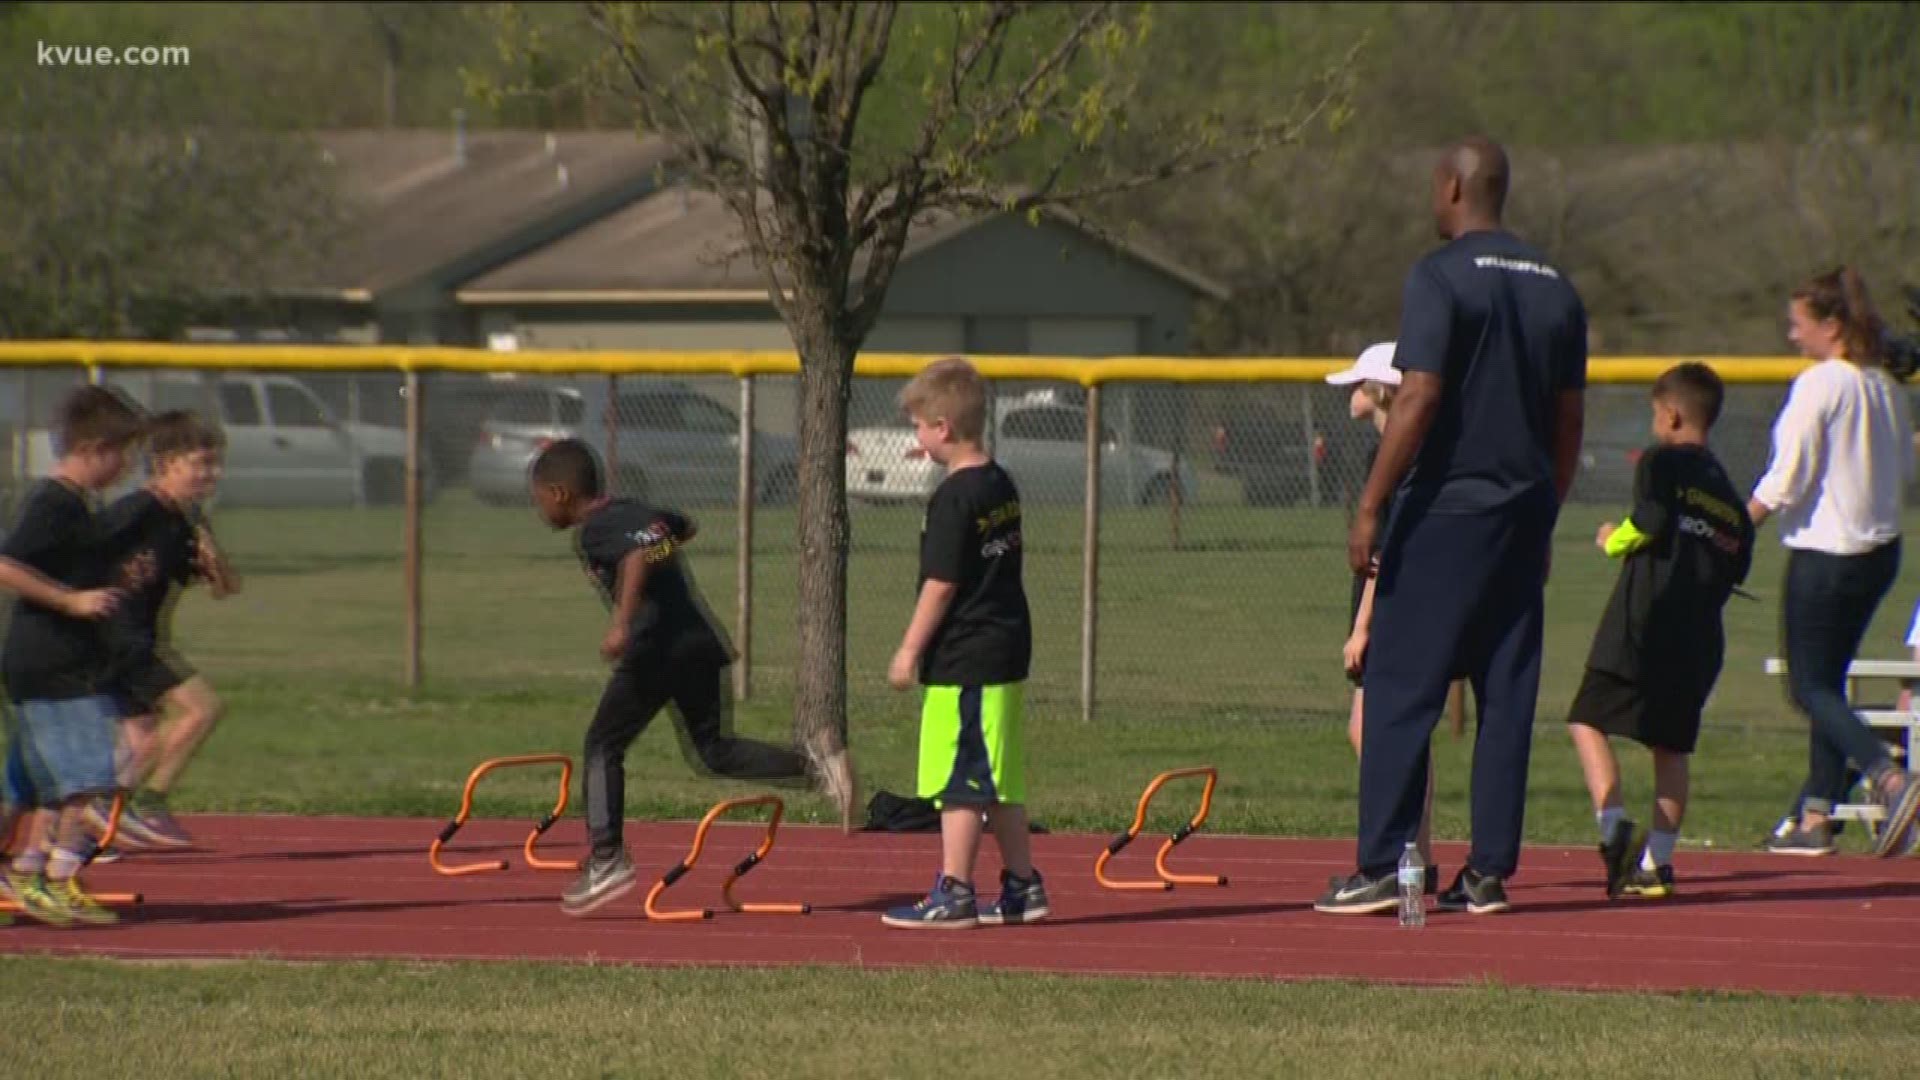 A group of kids spent some of their Spring Break running, having fun and building connections with Austin law enforcement.